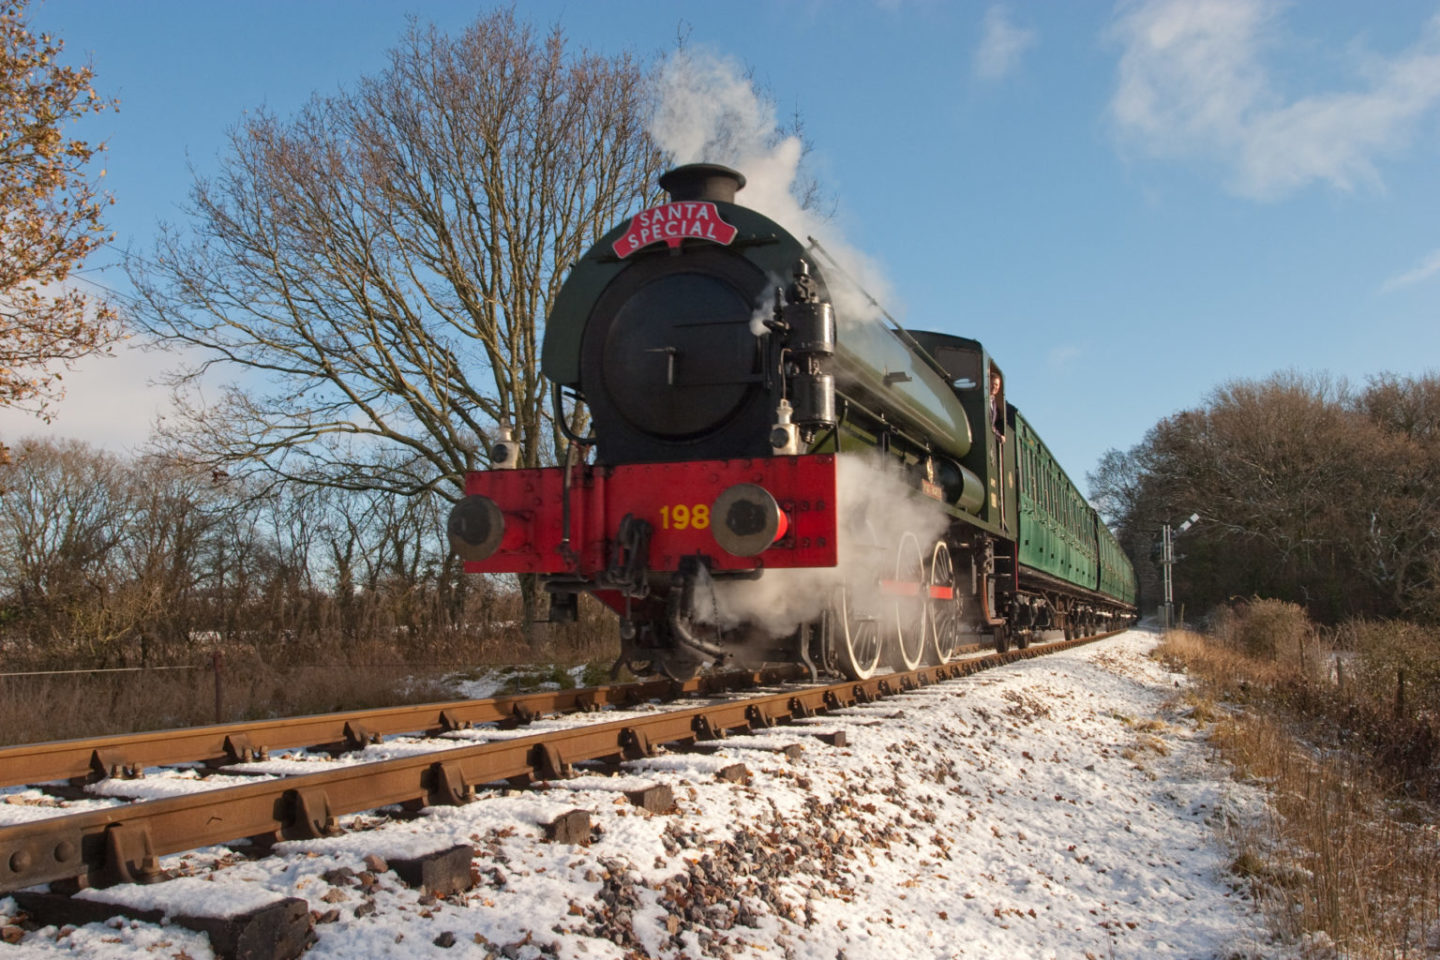 82 Santa Trains Journeys to Experience in 2023